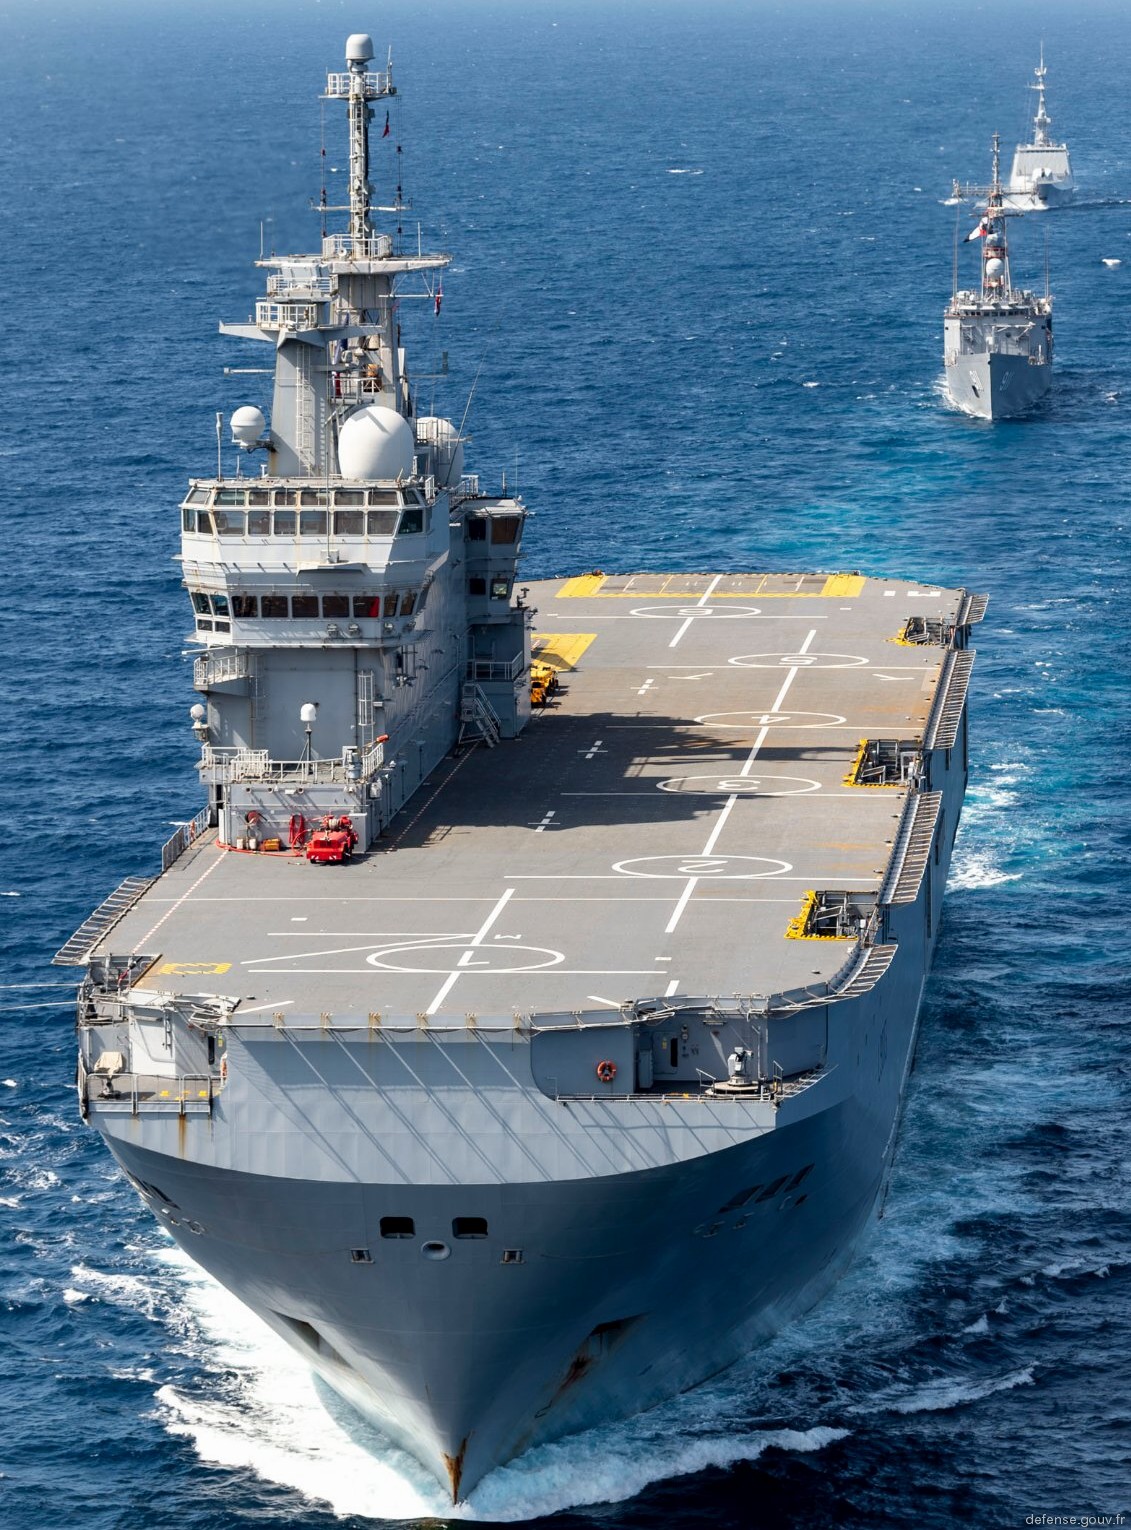 l-9013 fs mistral amphibious assault command ship french navy marine nationale 59